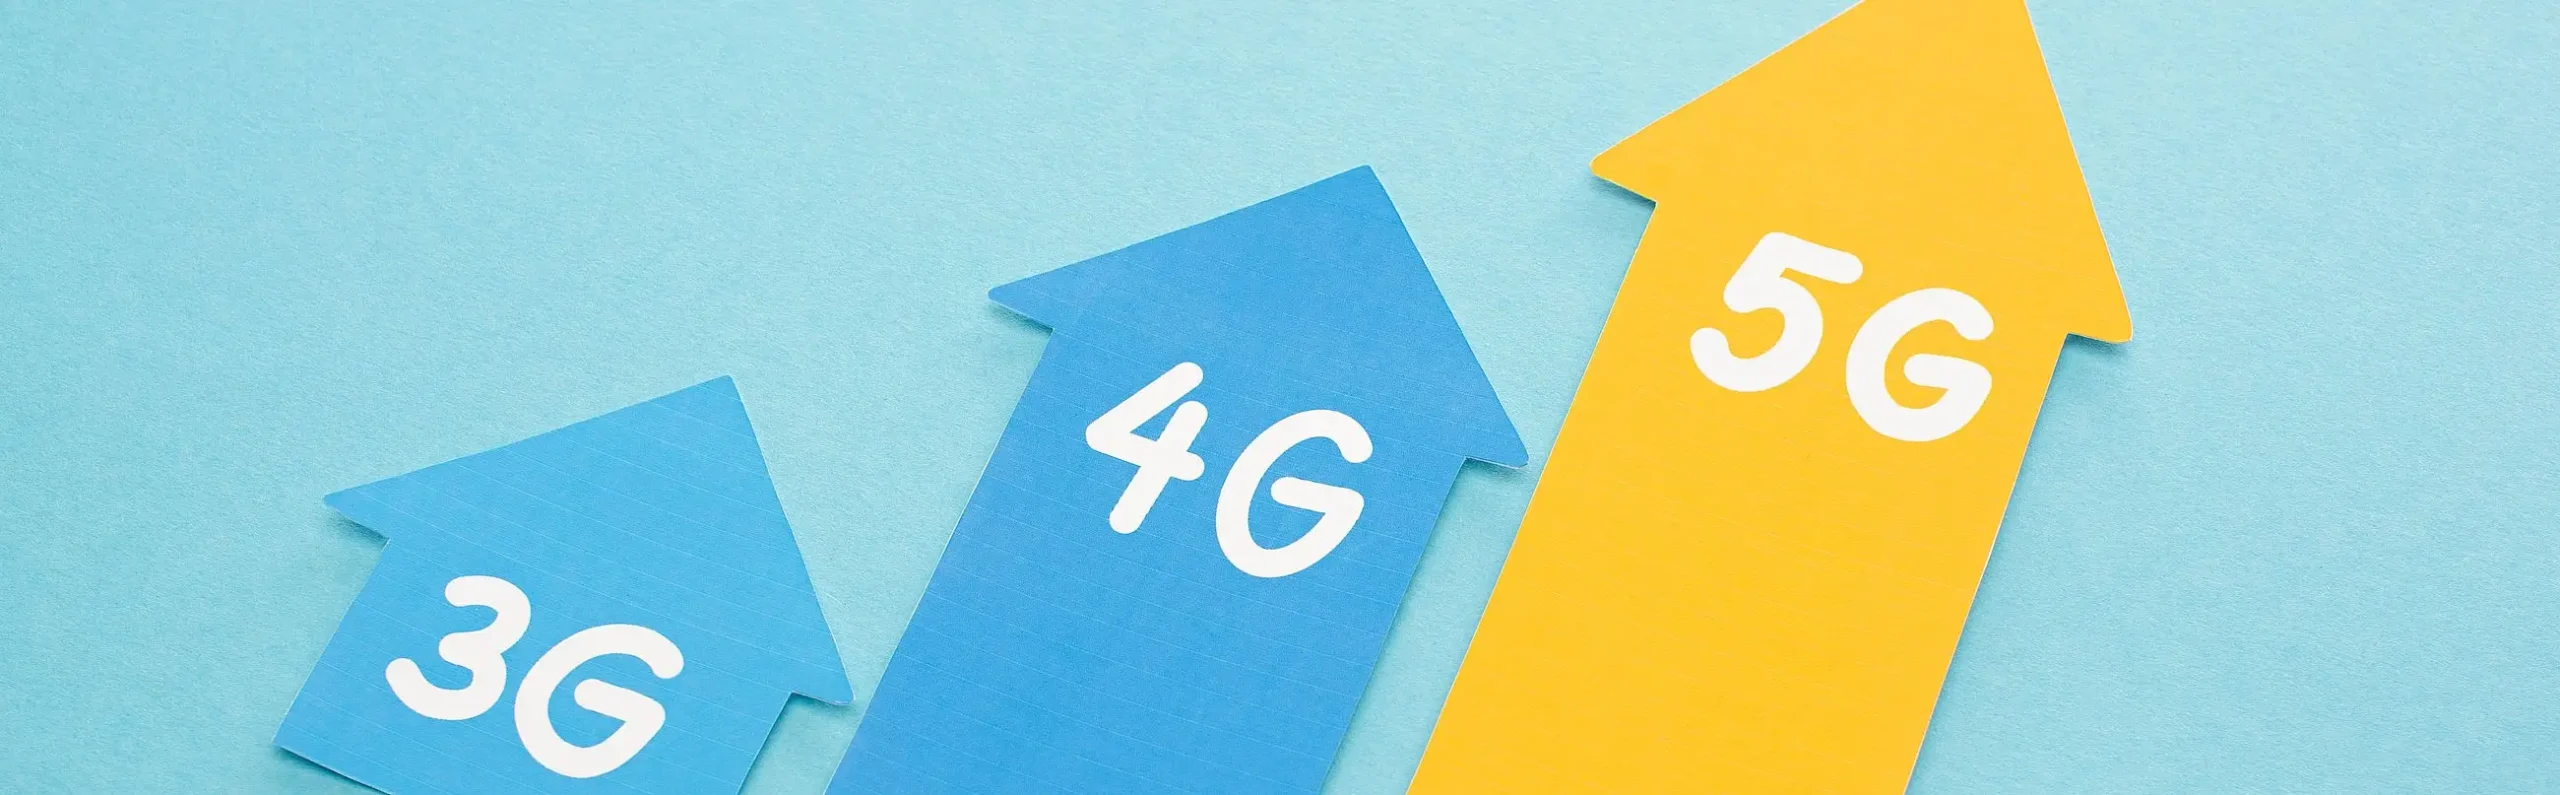 Navigating the Horizon: 5G and the Future of Connectivity Featured Image